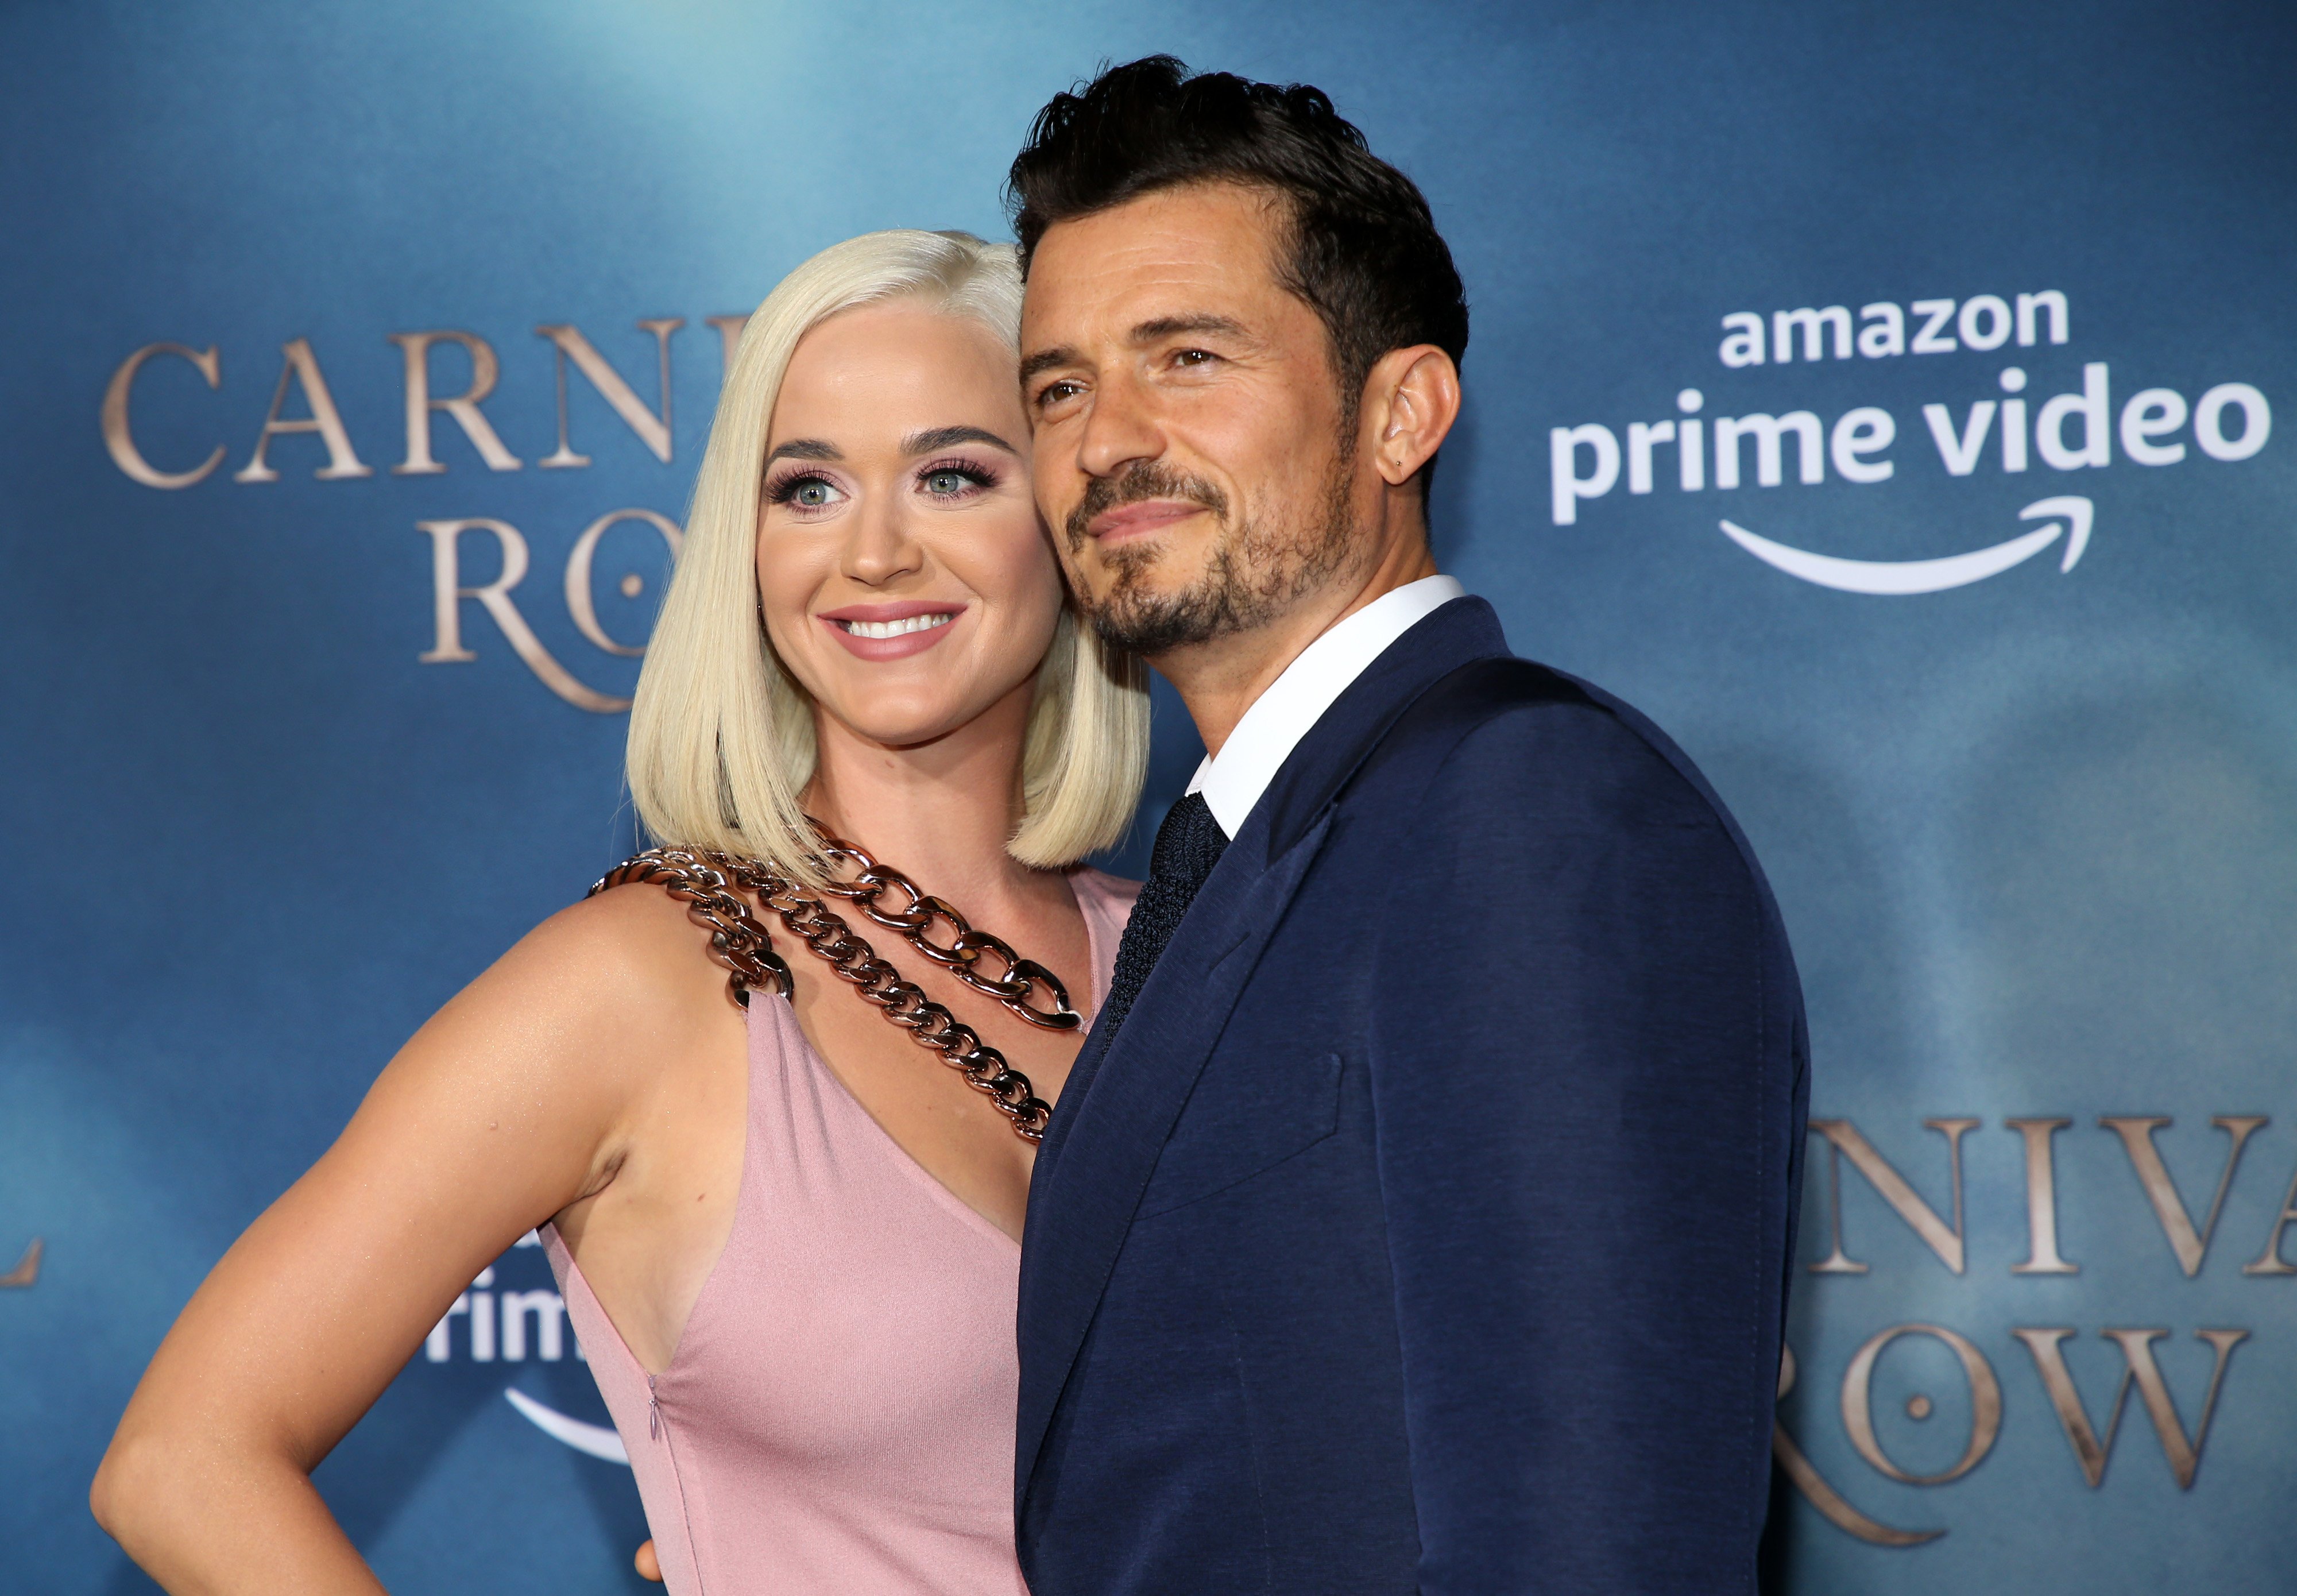 Katy Perry and Orlando Bloom attend the LA premiere of Amazon's "Carnival Row" on August 21, 2019, in Hollywood, California. | Photo: Getty Images.